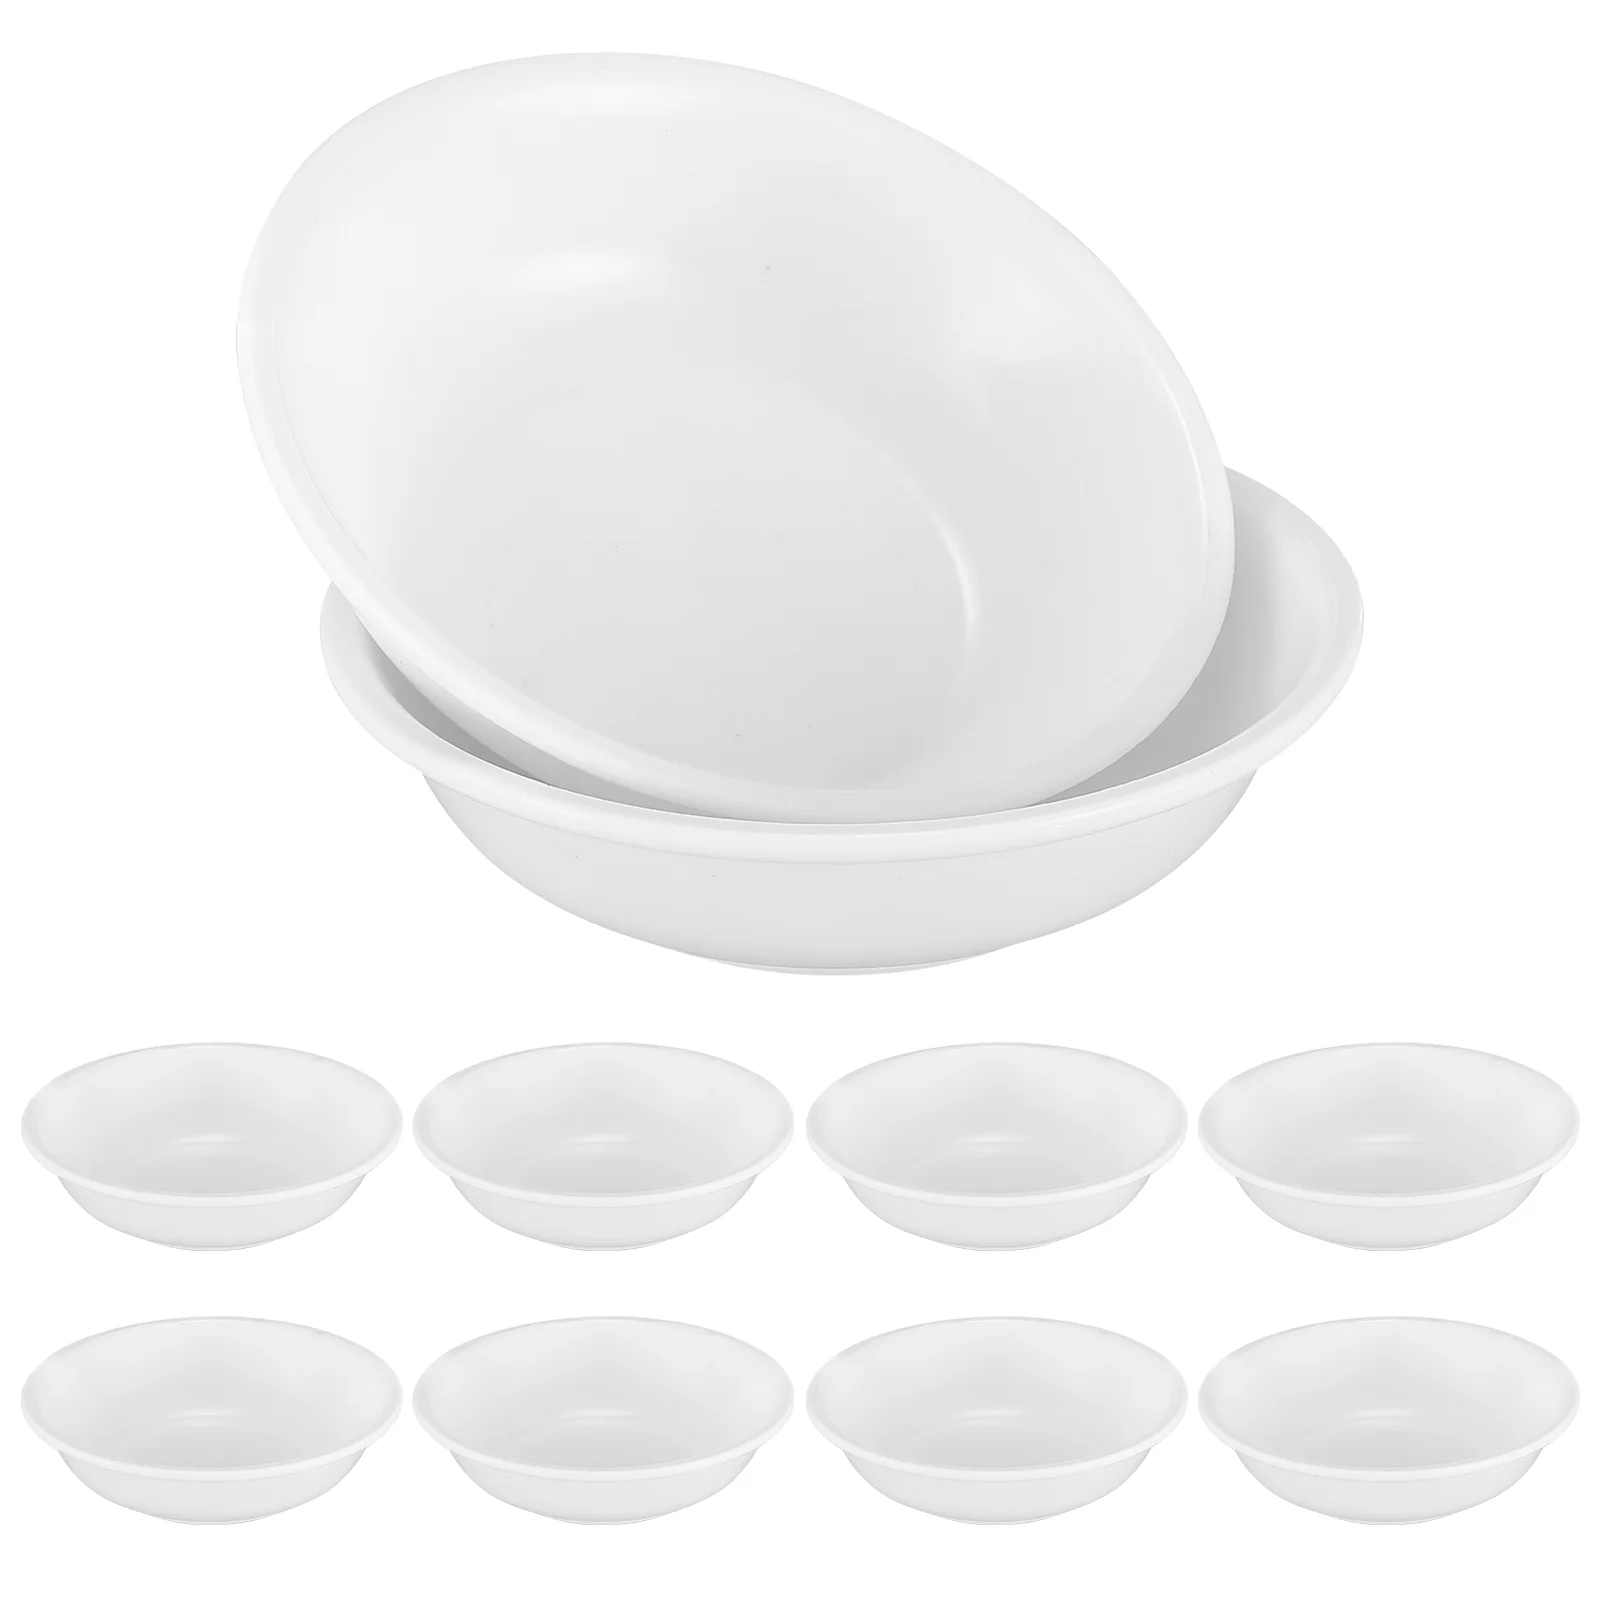 

Small Seasoning Bowls Dipping Dishes Set Saucer Plate Saucers Plastic Mini Appetizer Plates